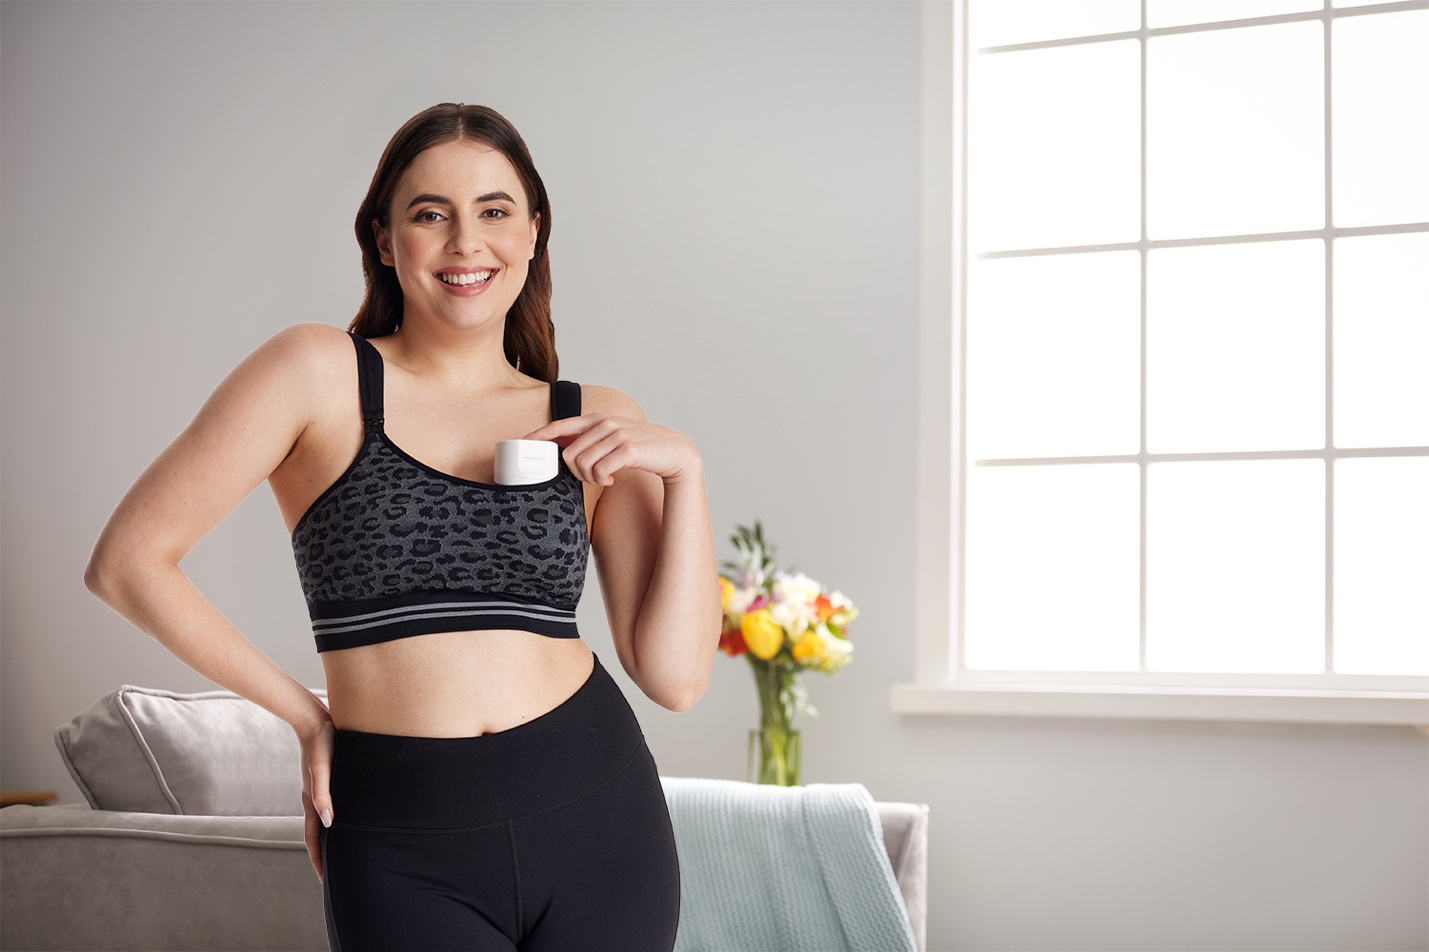 Momcozy Launches Special Offers on Their Best Selling Nursing Bra